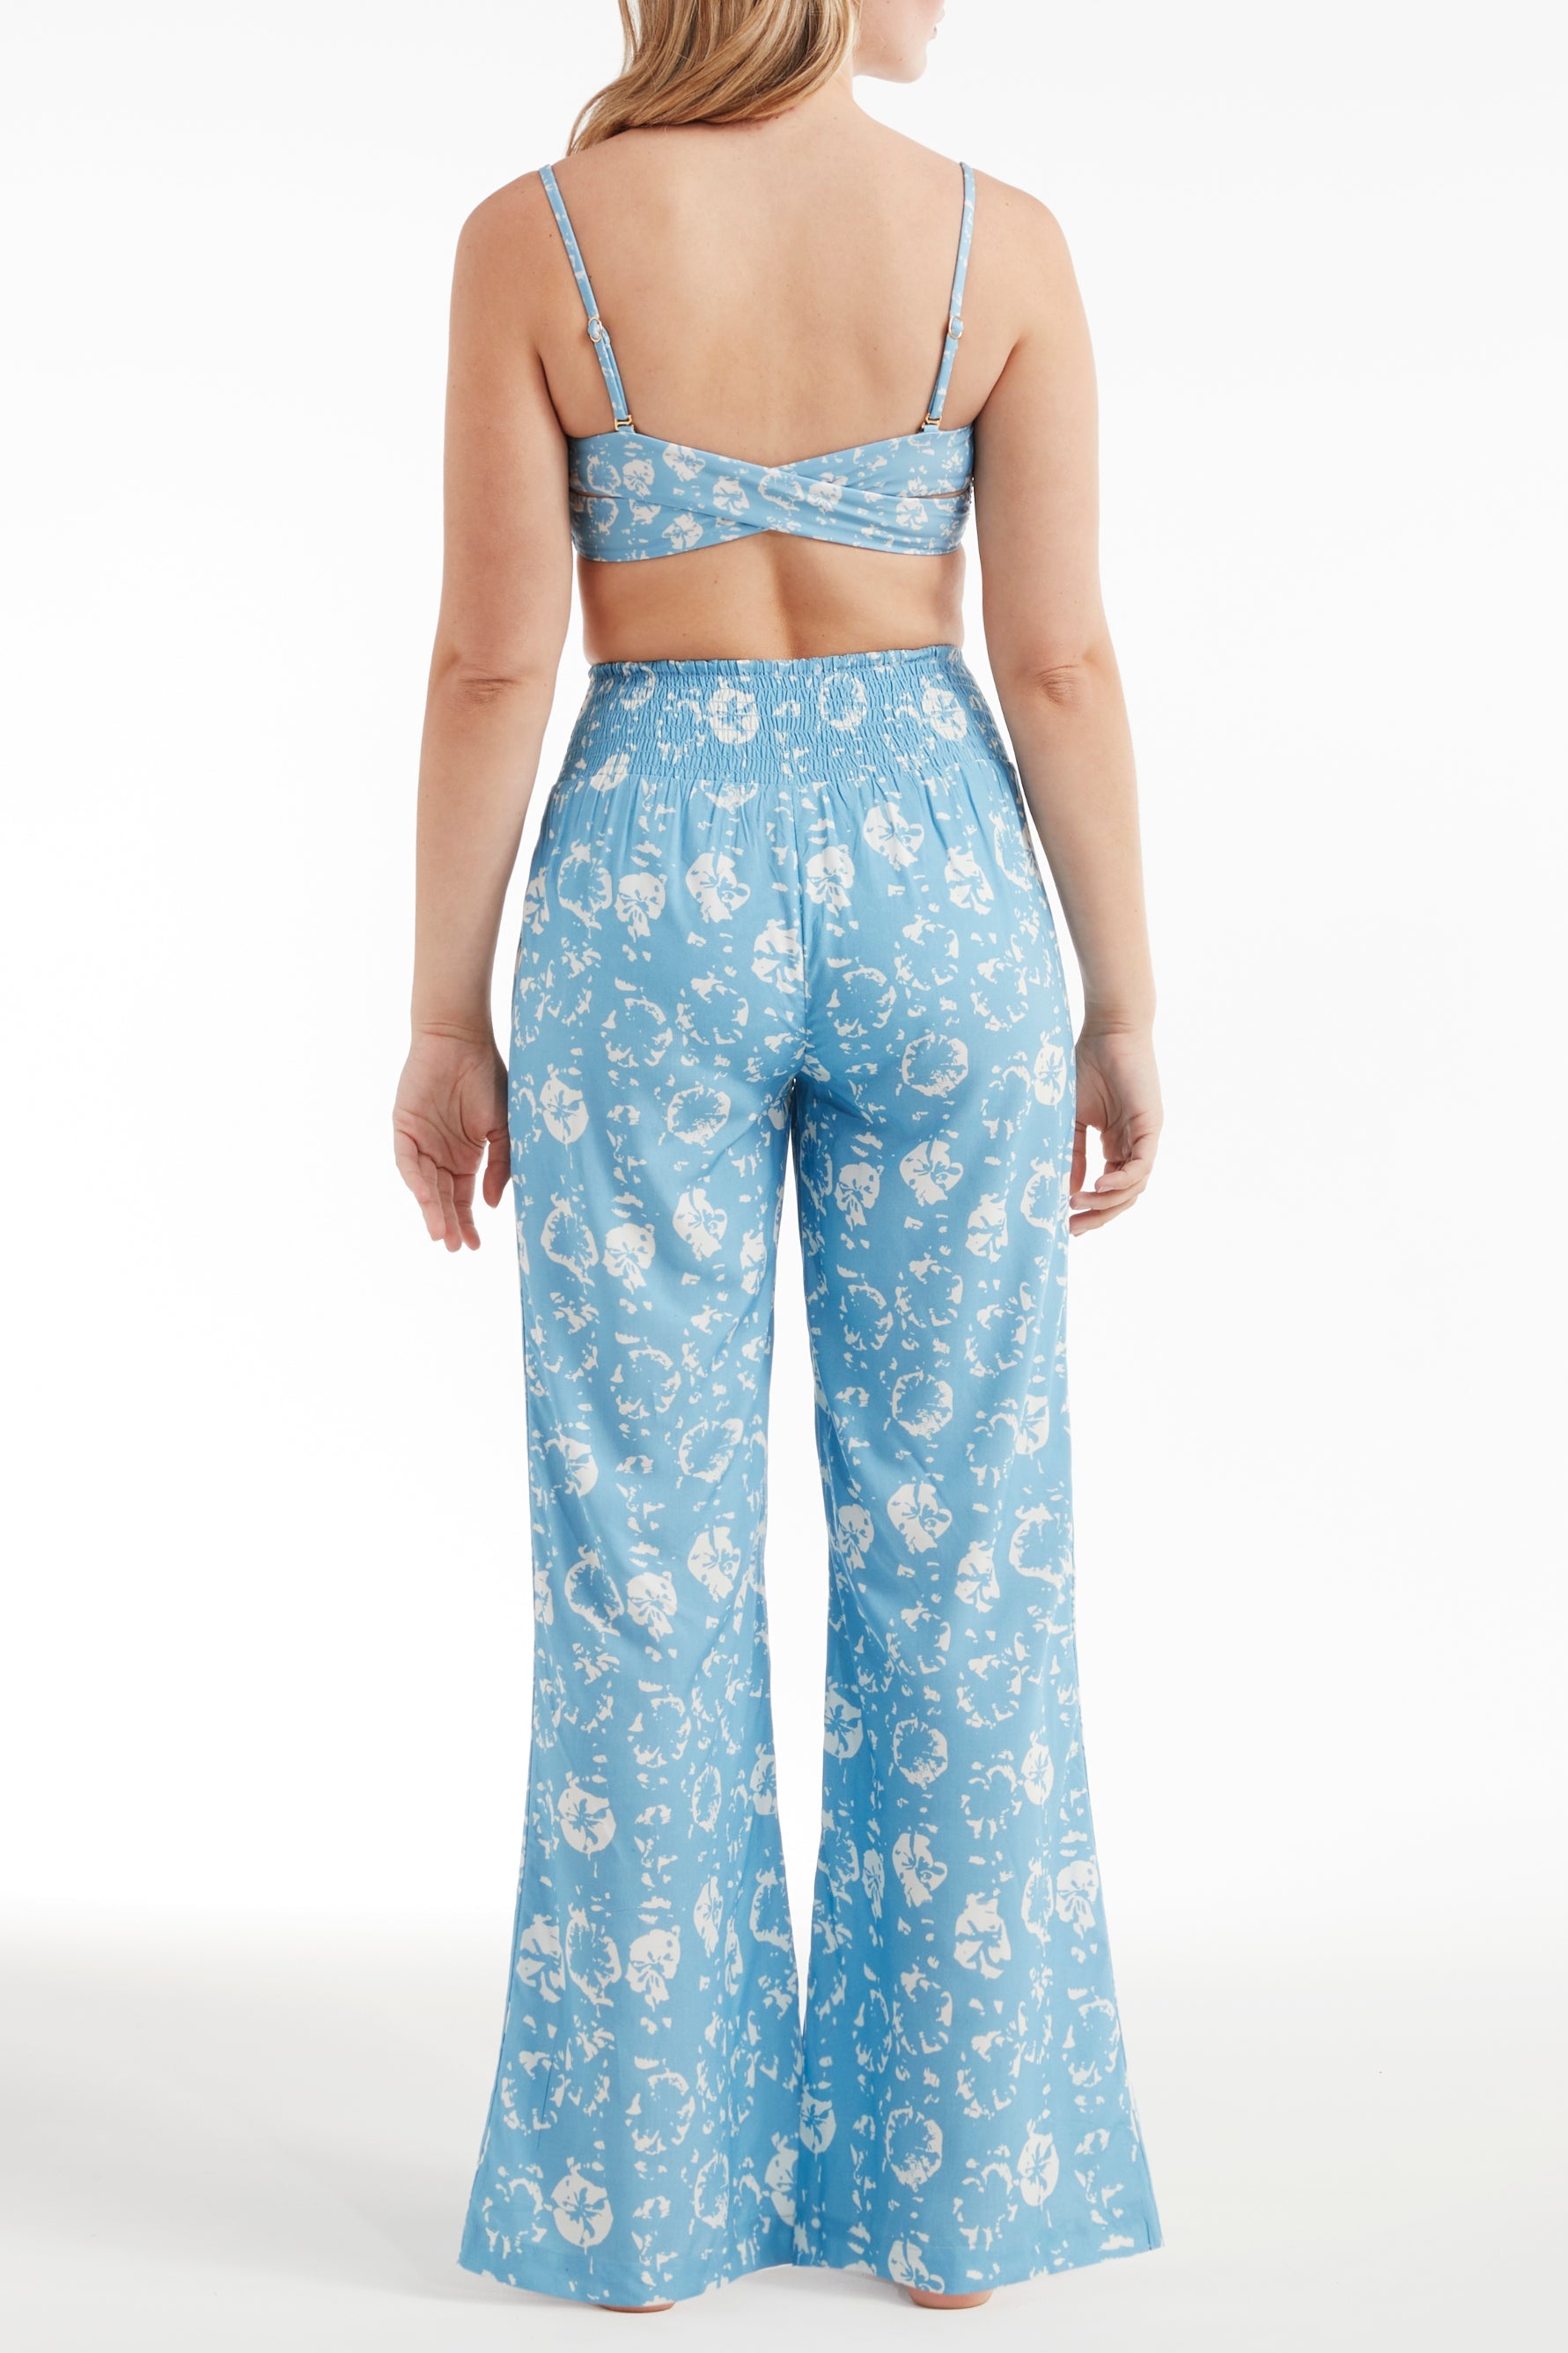 Nora Pants by Hermoza